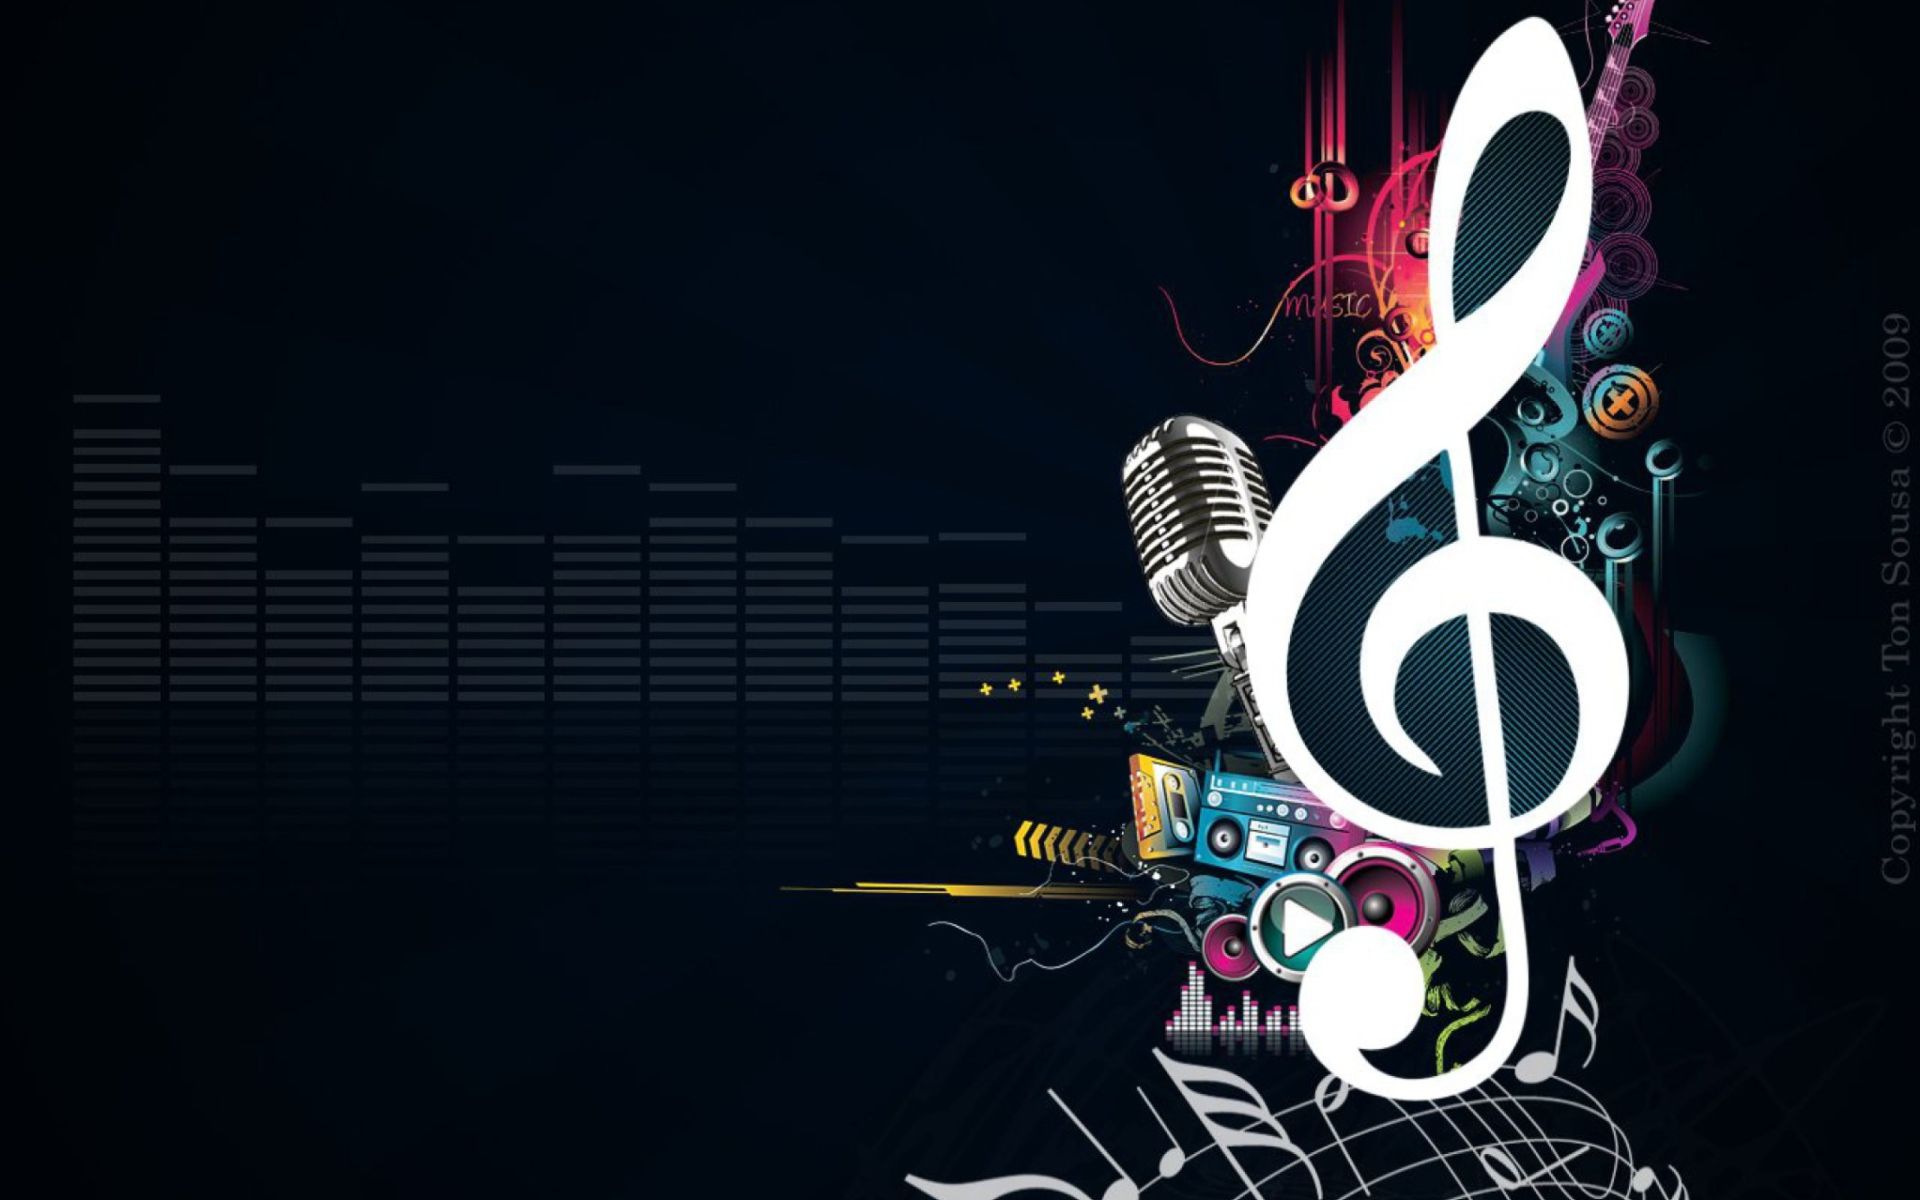 wallpapers hd musica,graphic design,font,text,audio equipment,music